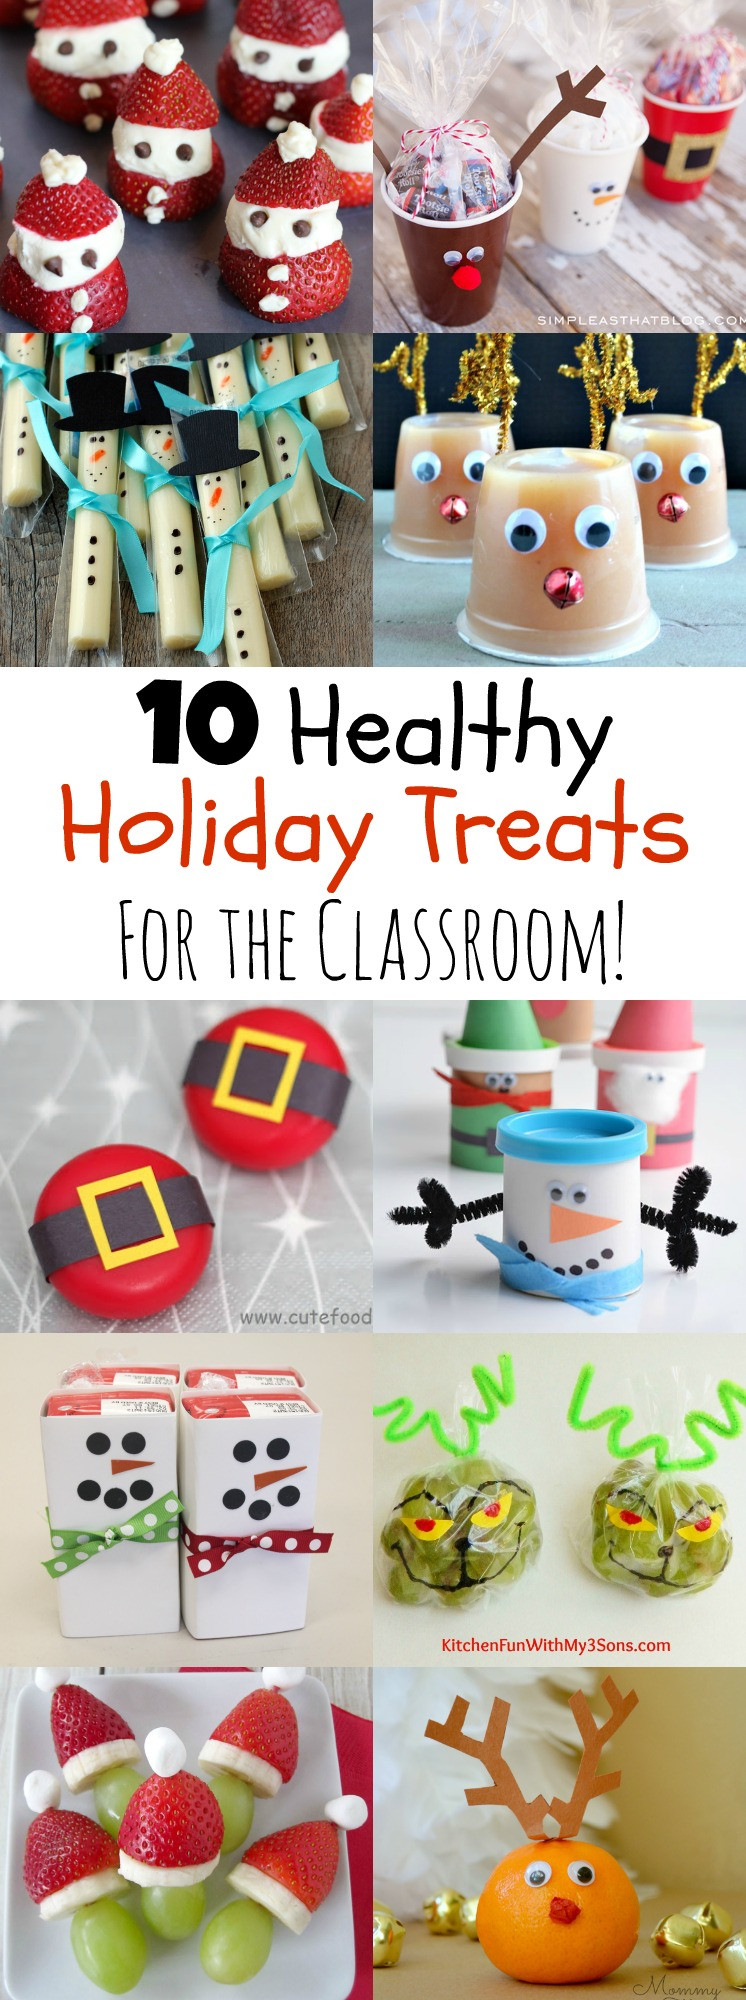 Christmas Class Party Ideas
 10 Healthy Holiday Treats for the Classroom MOMables